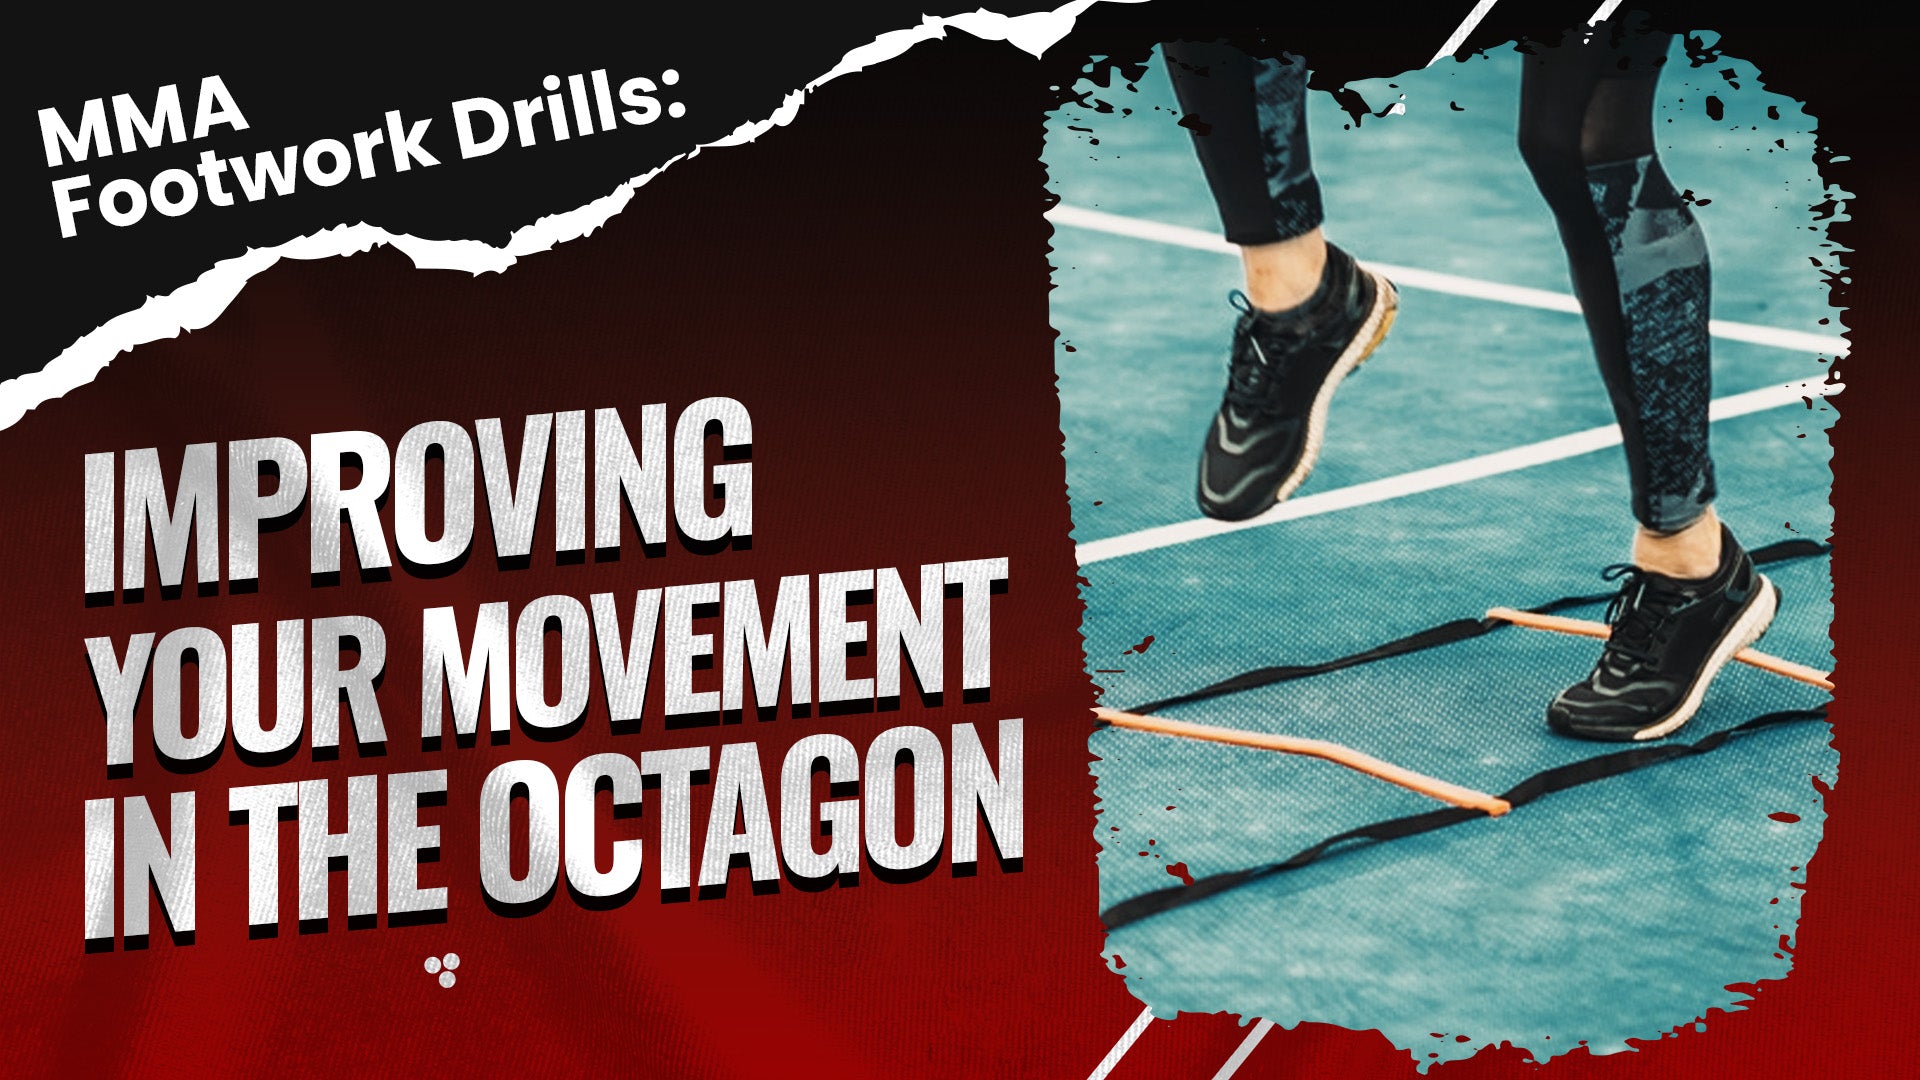 MMA Footwork Drills: Improving Your Movement in the Octagon